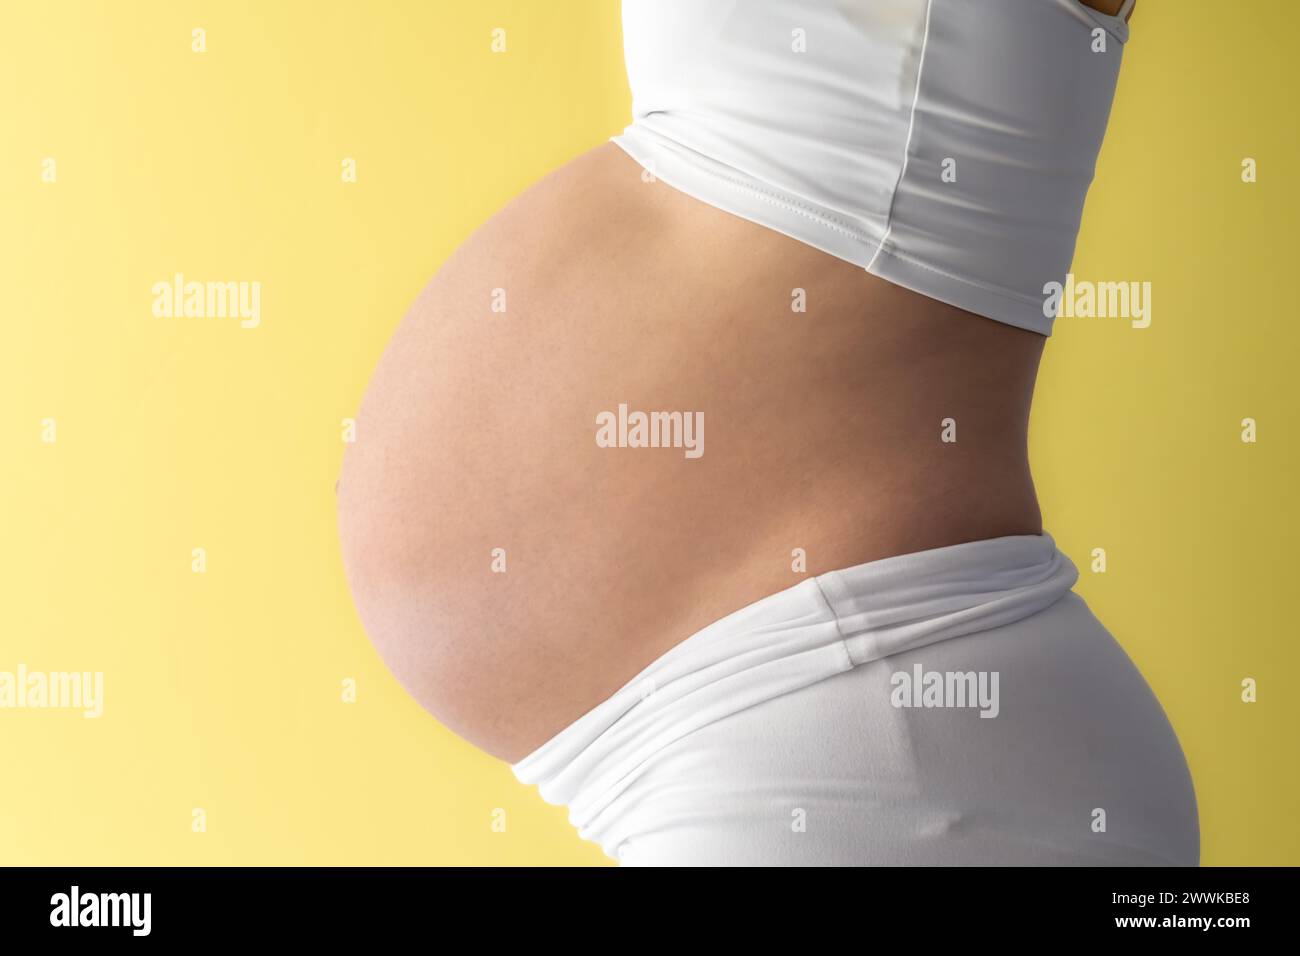 Description: Midsection of unrecognizable standing mother in white cloths with very round pregnant baby belly. Side view. Yellow background. Bright sh Stock Photo